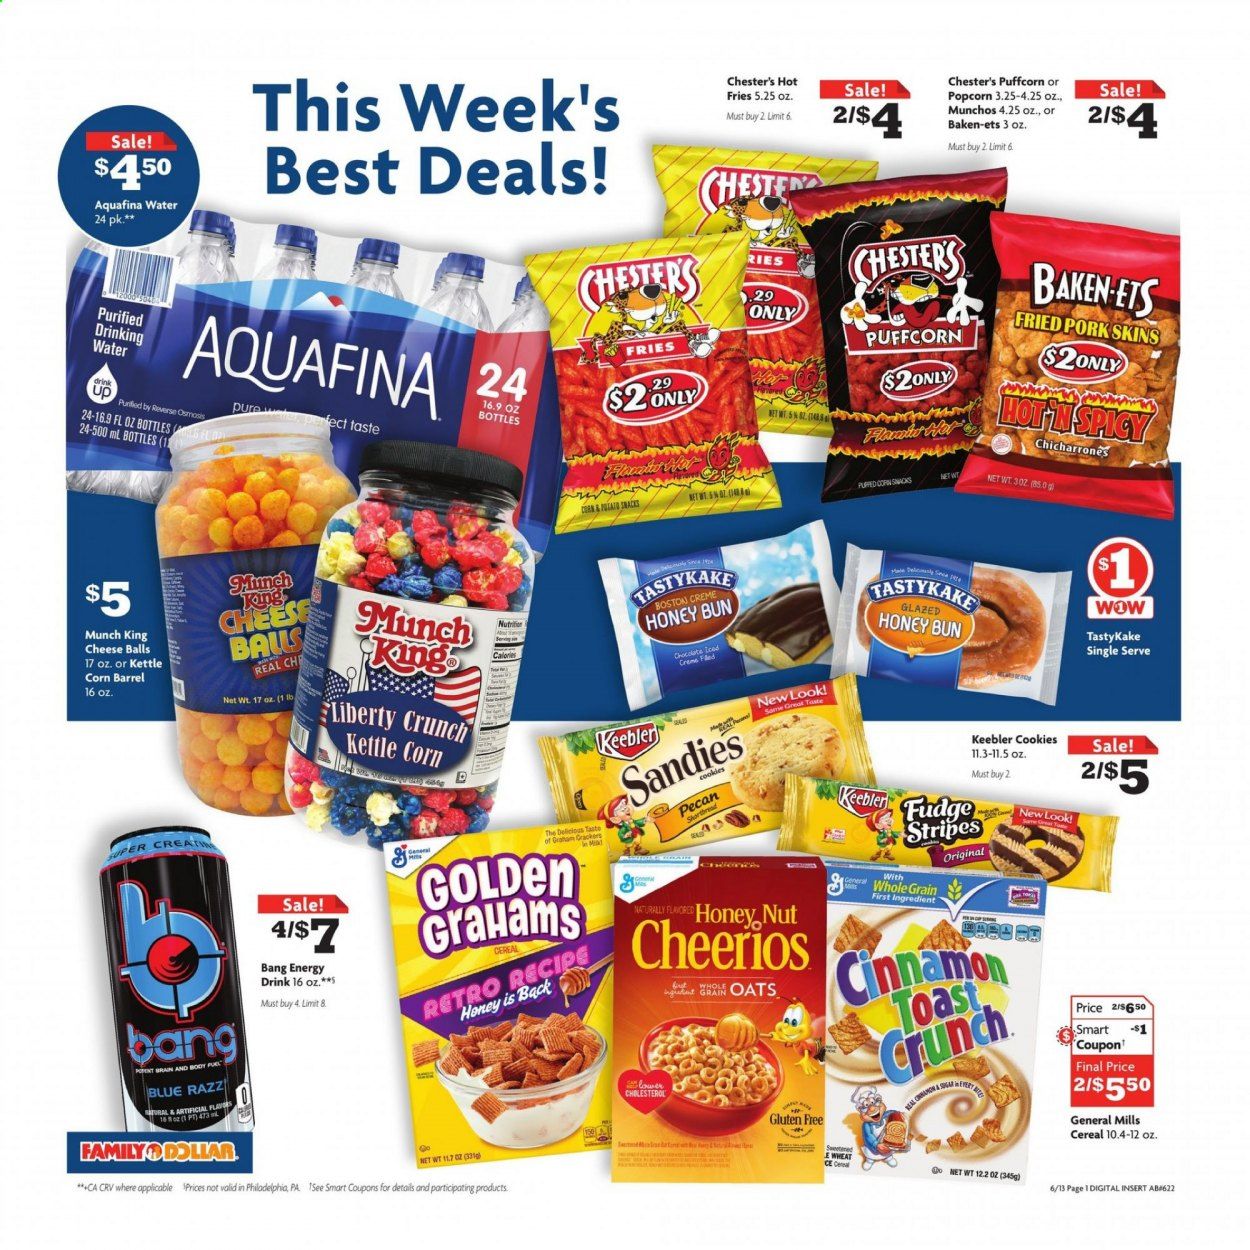 family-dollar-current-sales-weekly-ads-online